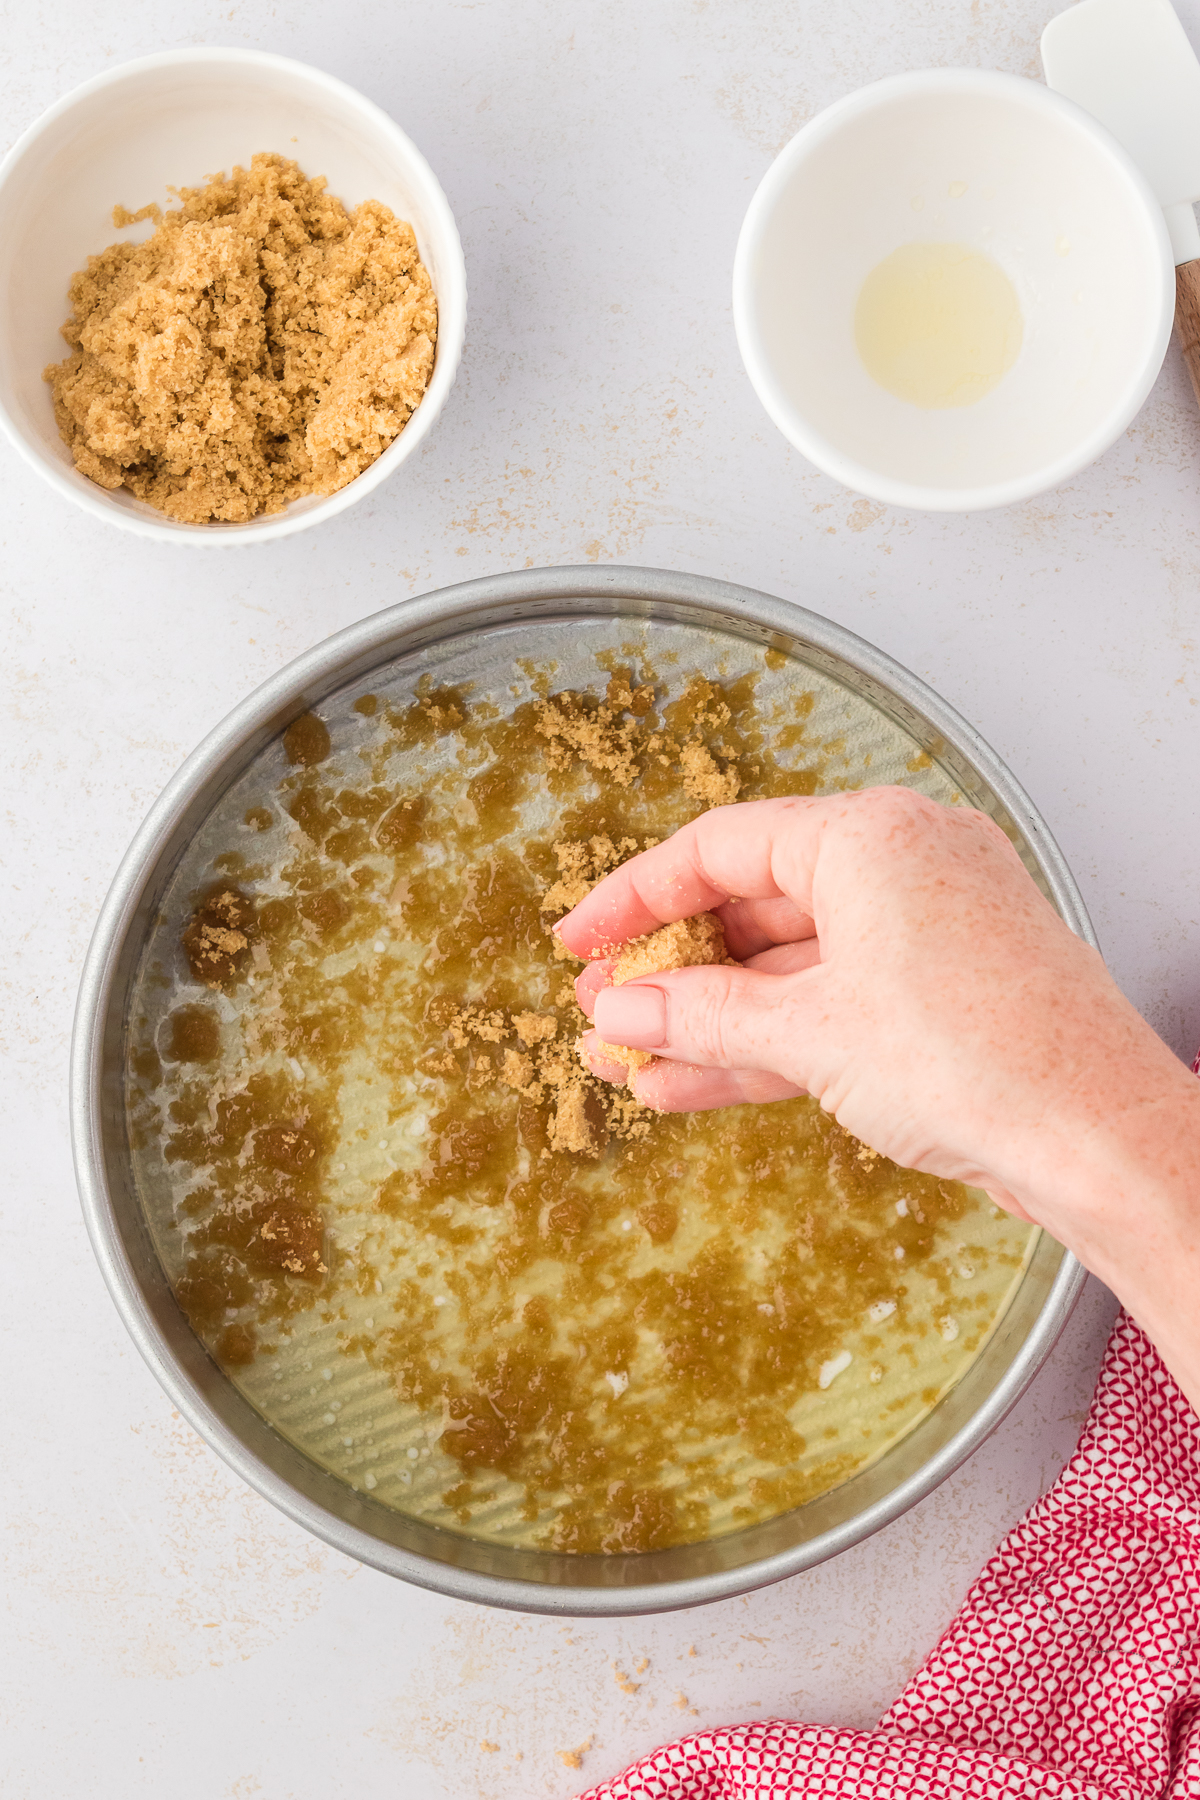 a round cake pan being sprinkled with brown sugar beside a red and white kitchen towel, a small white bowl of melted butter and another small white bowl with brown sugar in it